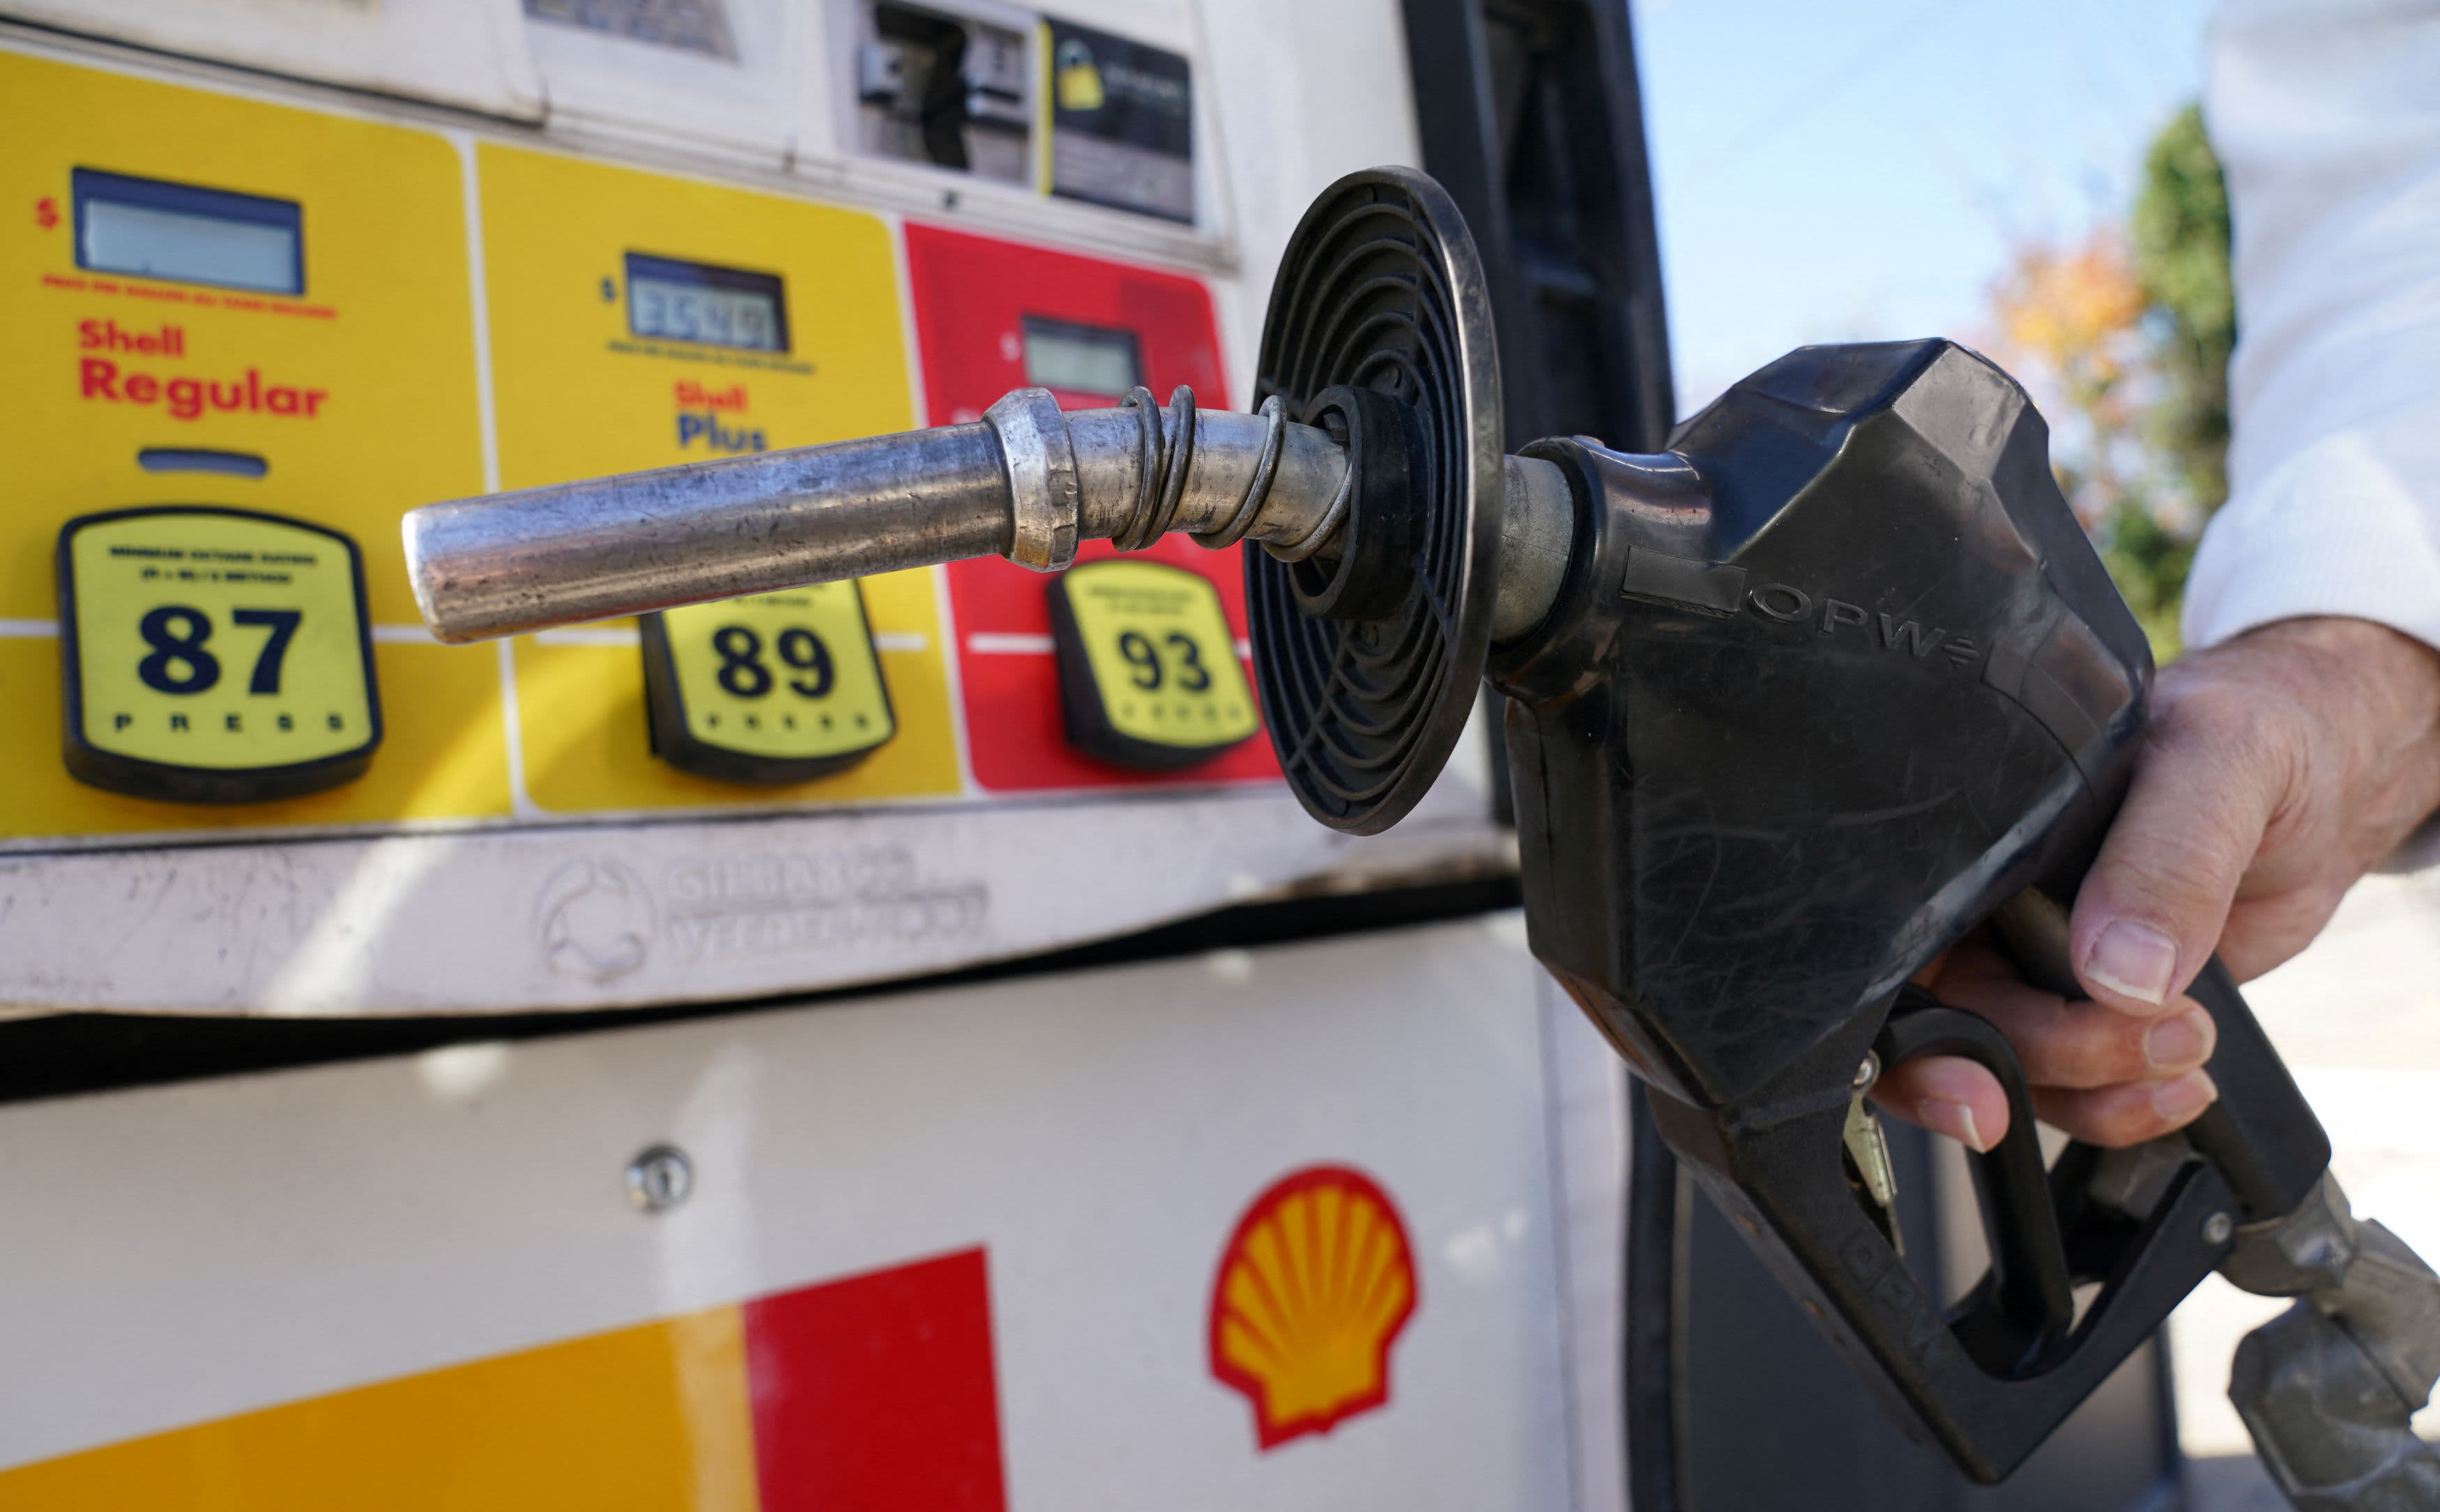 Why New Jersey doesn't let people pump their own gas